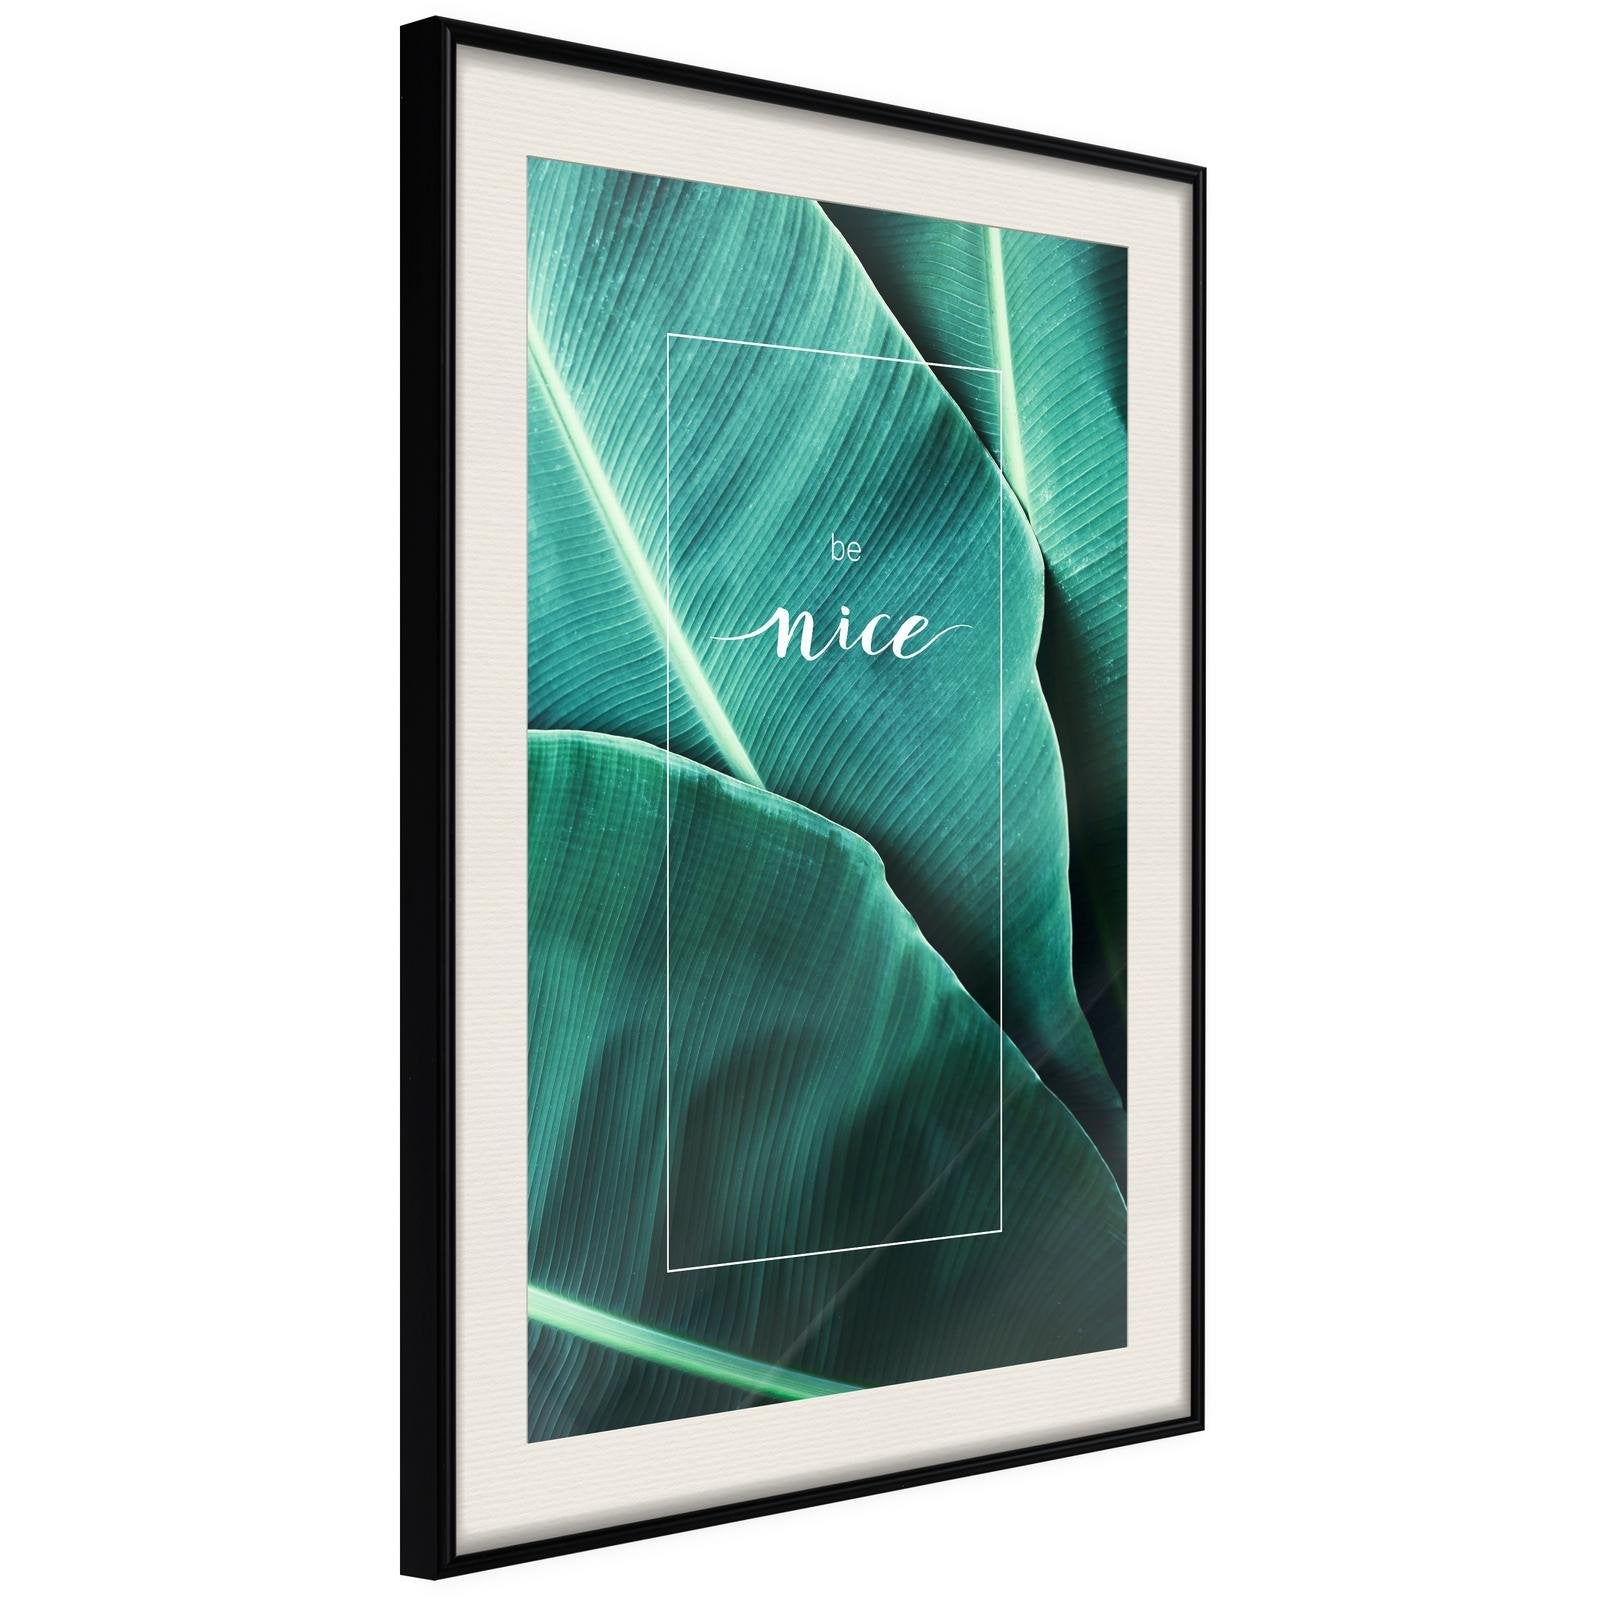 Inramad Poster / Tavla - Banana Leaves with a Message (Green)-Poster Inramad-Artgeist-20x30-Svart ram med passepartout-peaceofhome.se